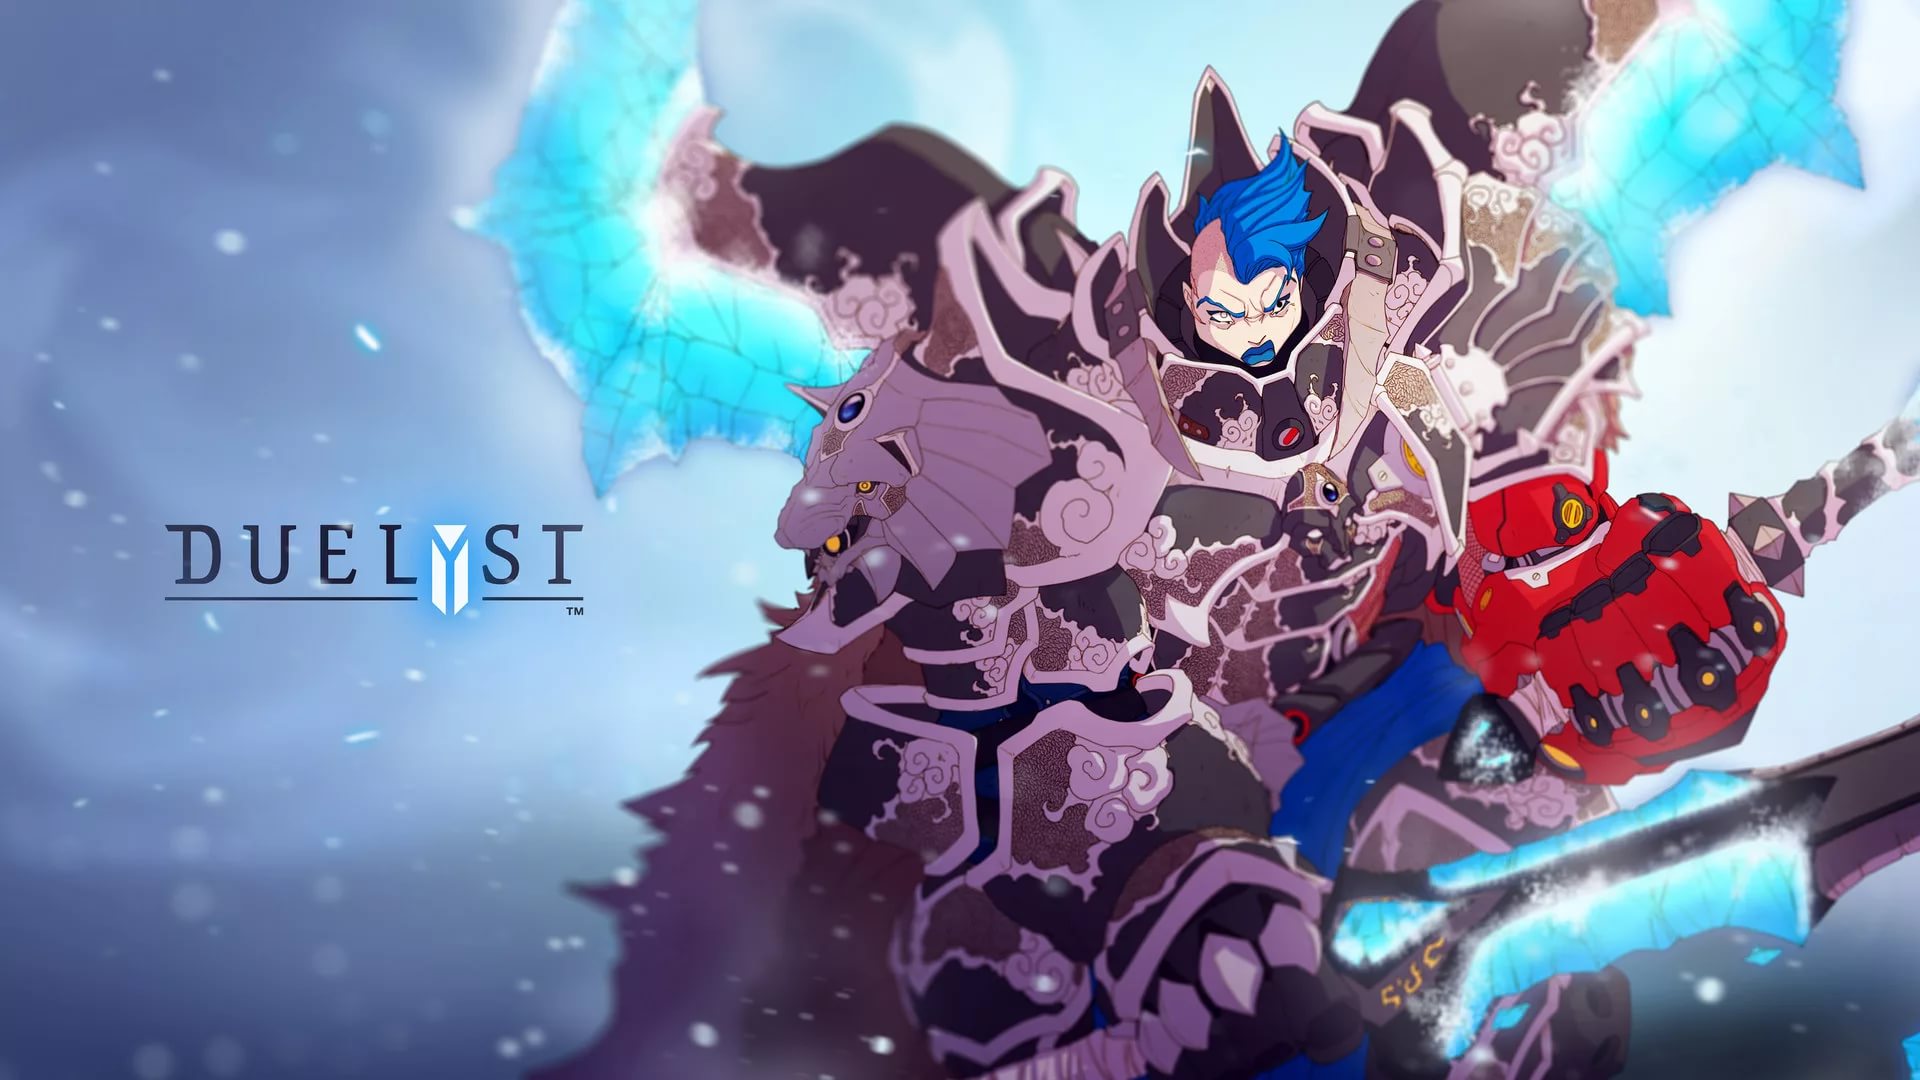 Duelyst Wallpapers And Backgrounds - Duelyst Vanar General , HD Wallpaper & Backgrounds